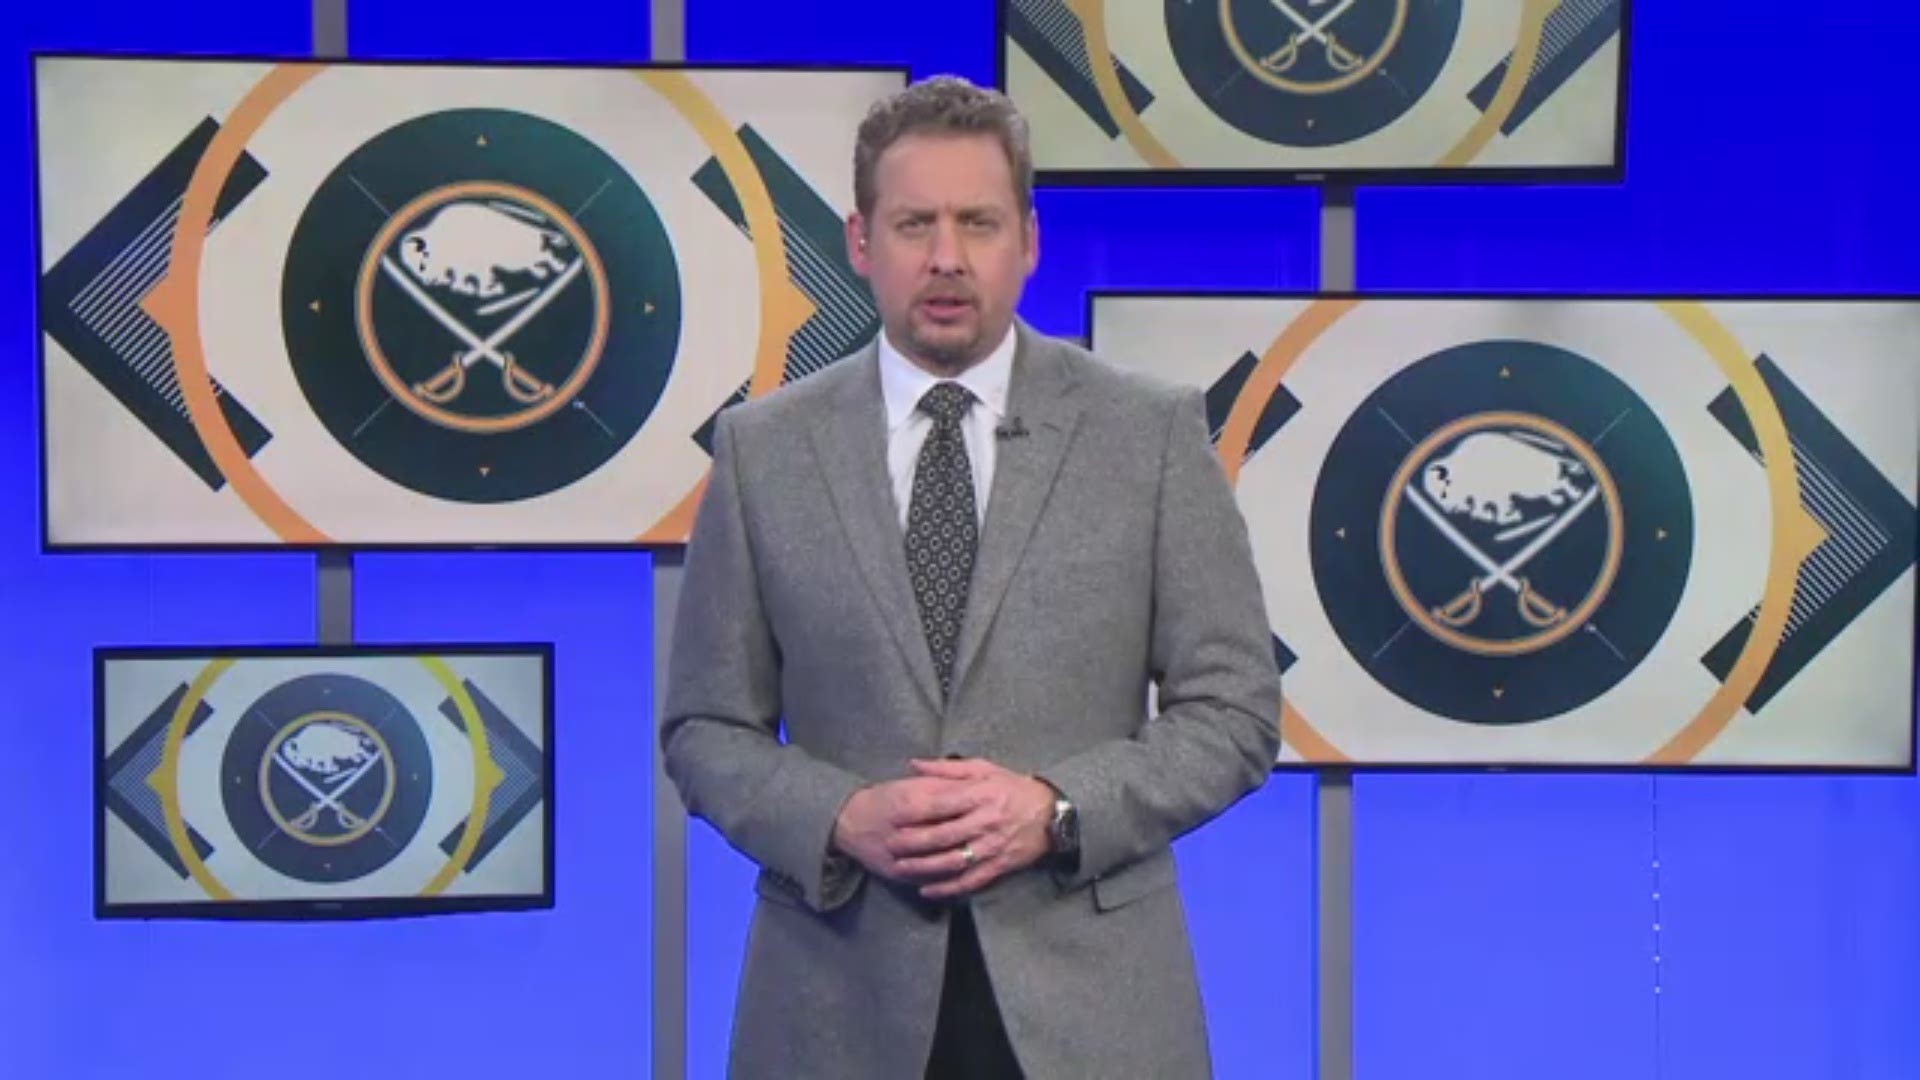 WGRZ's Adam Benigni shares his thoughts on where things stand for the Sabres franchise after a 6-1 loss to Colorado.